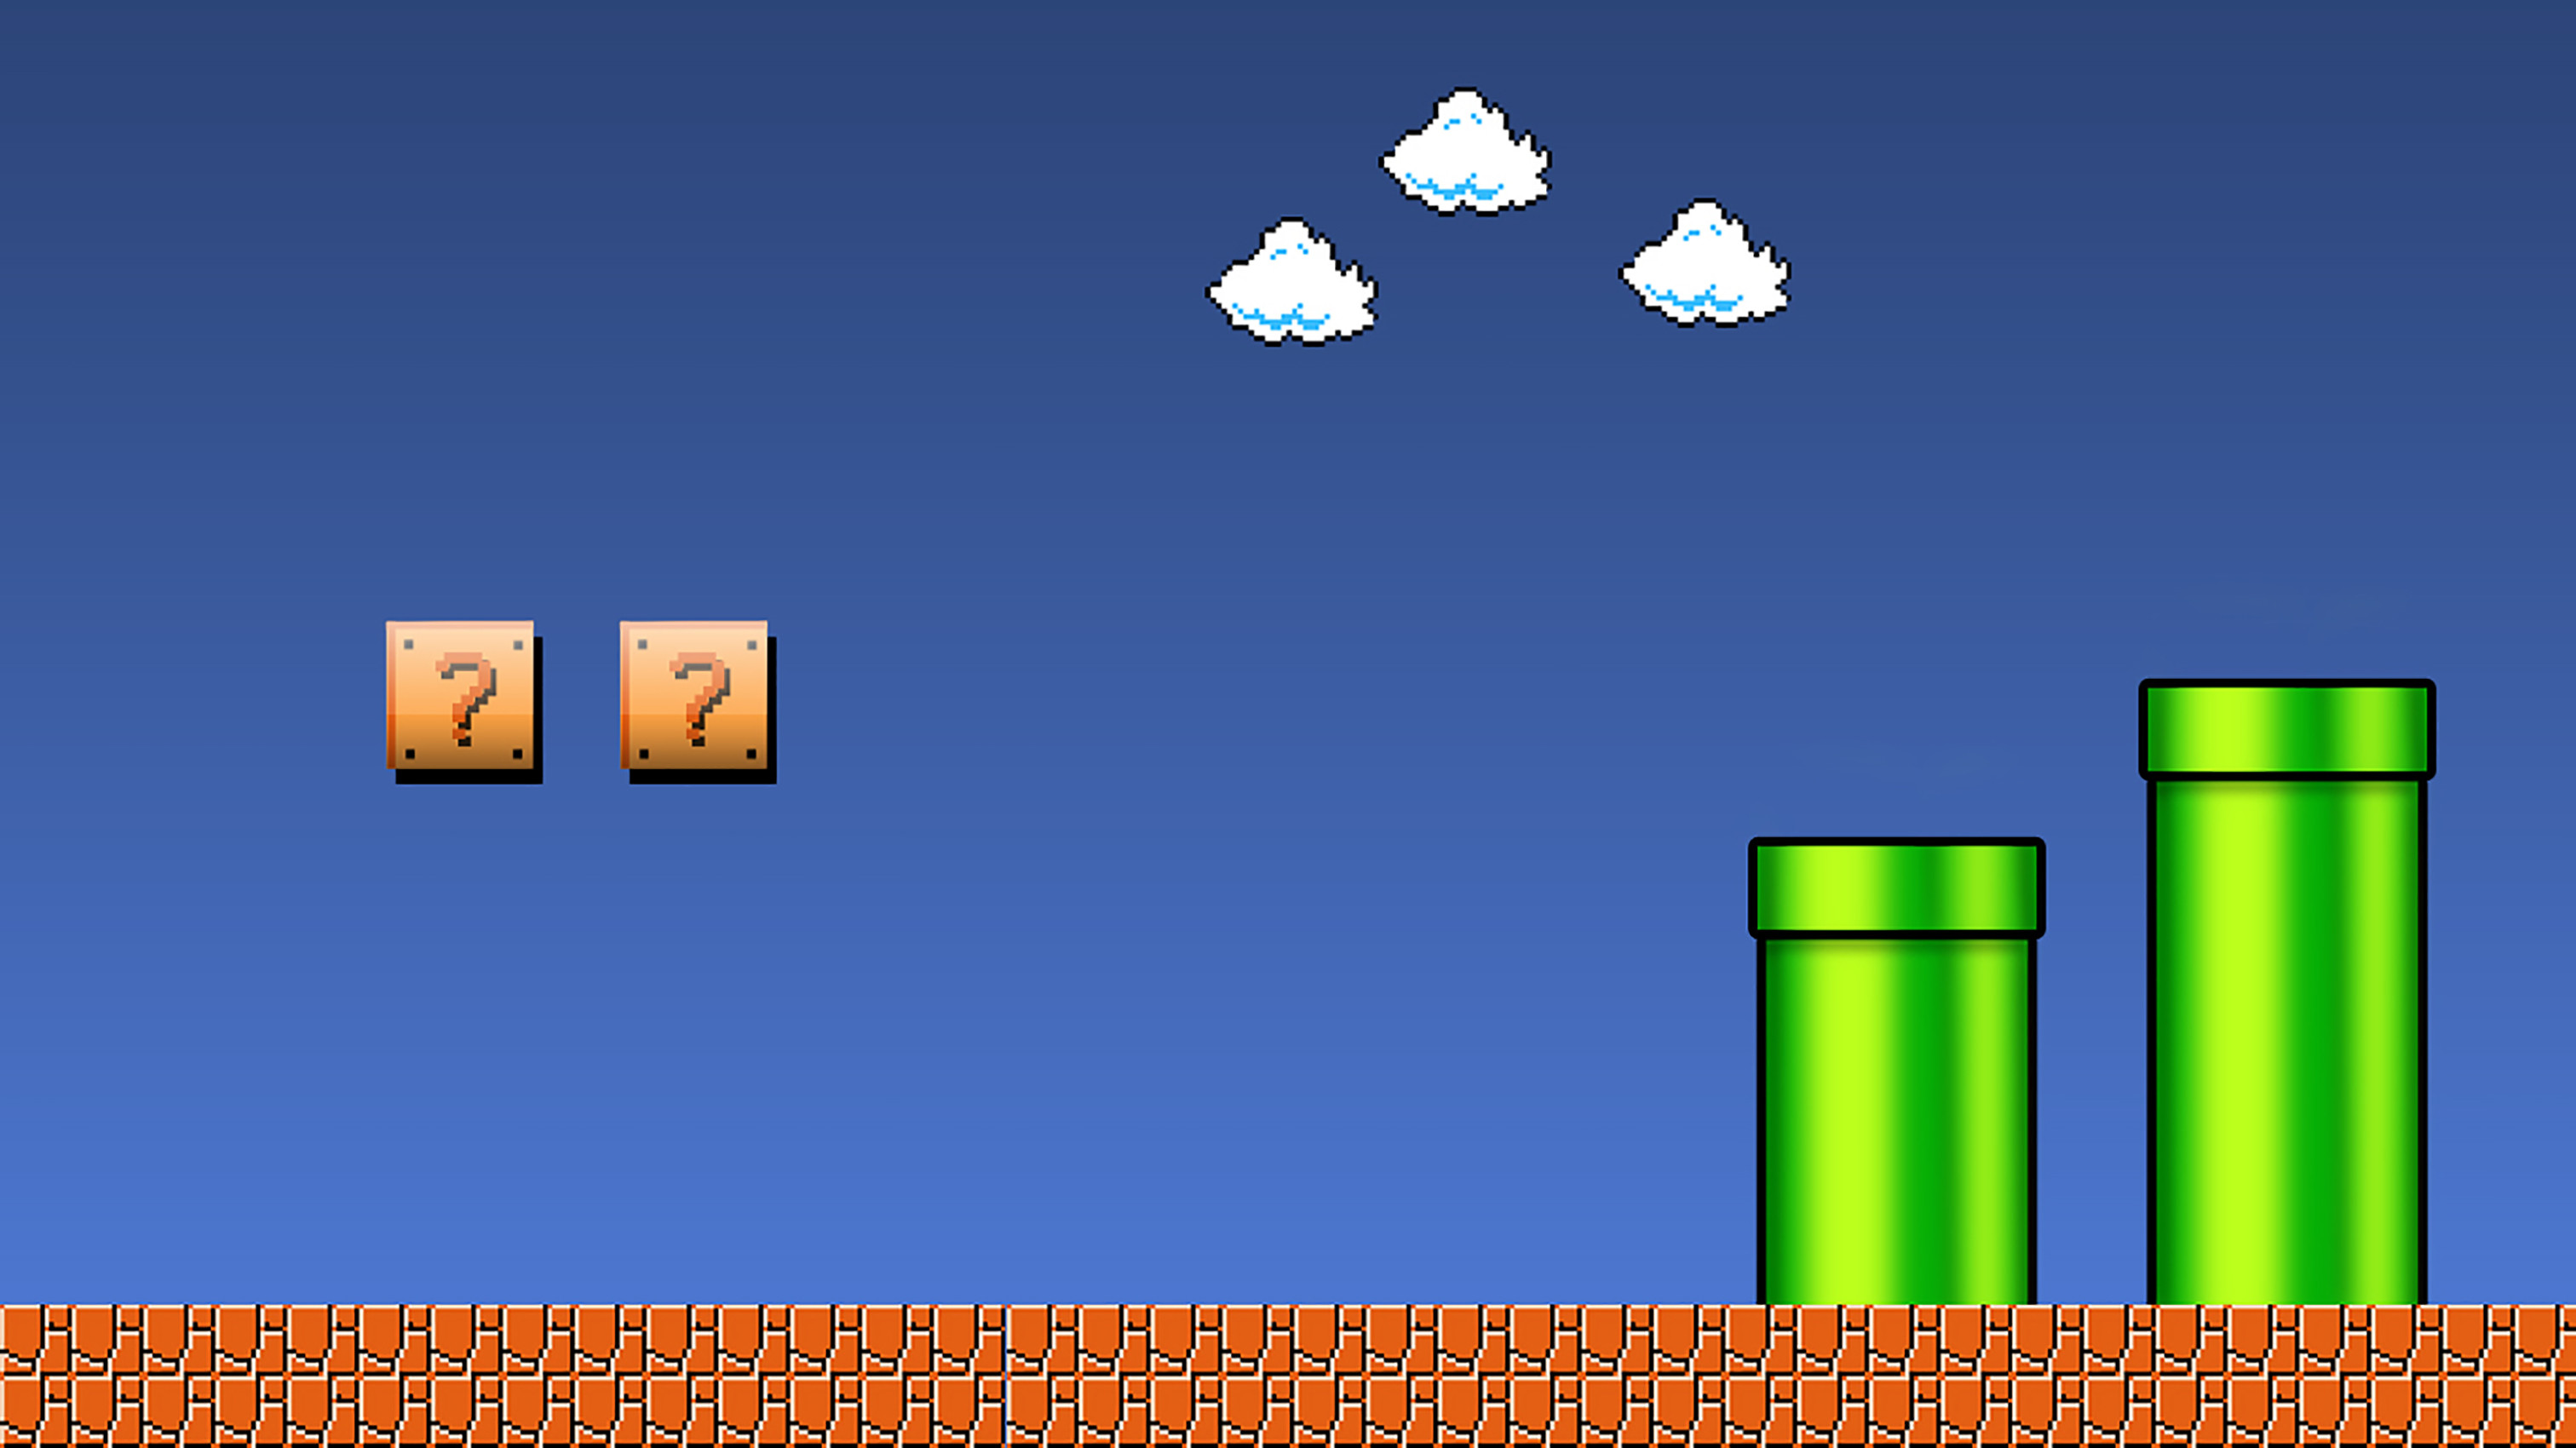 3024x1700 Super Mario Brothers Wallpaper created in Photoshop